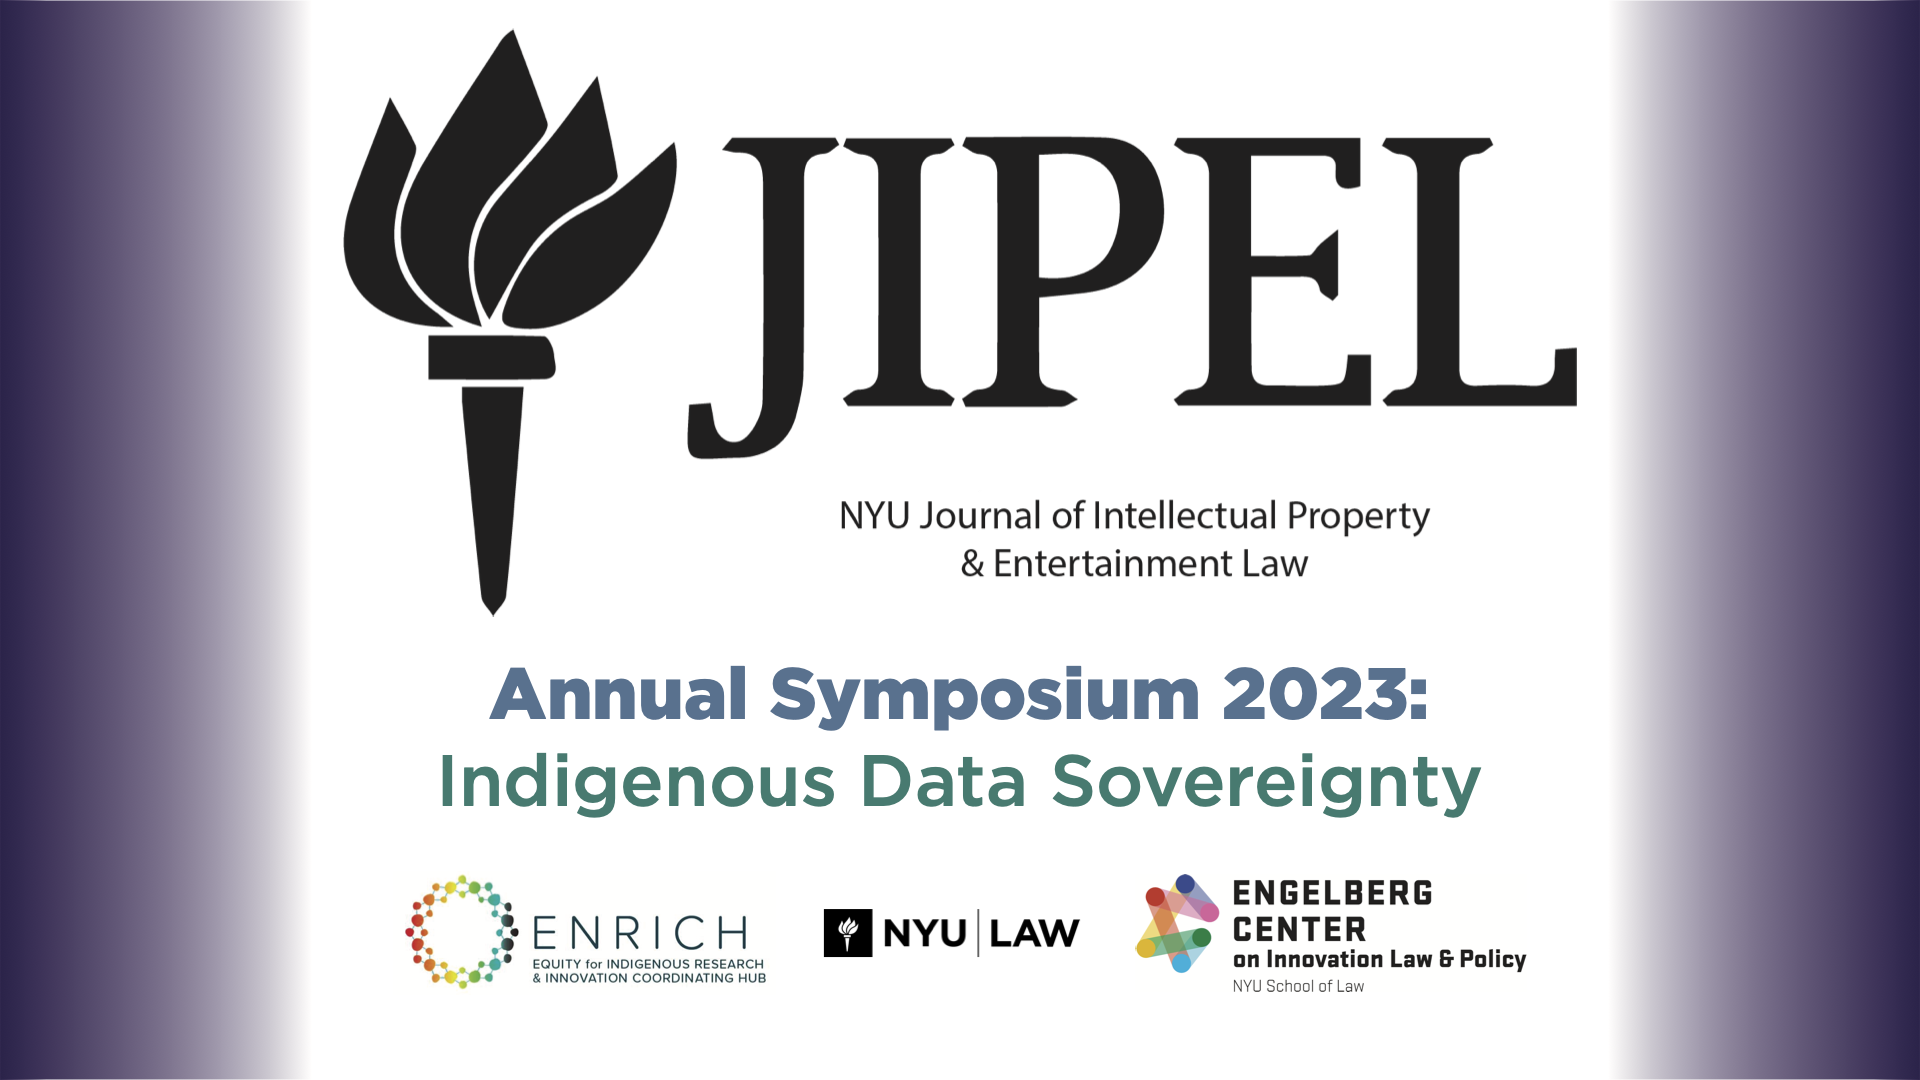 Hero image for the JIPEL IDS symposium, with the title of the event and logos of the supporting organizations.